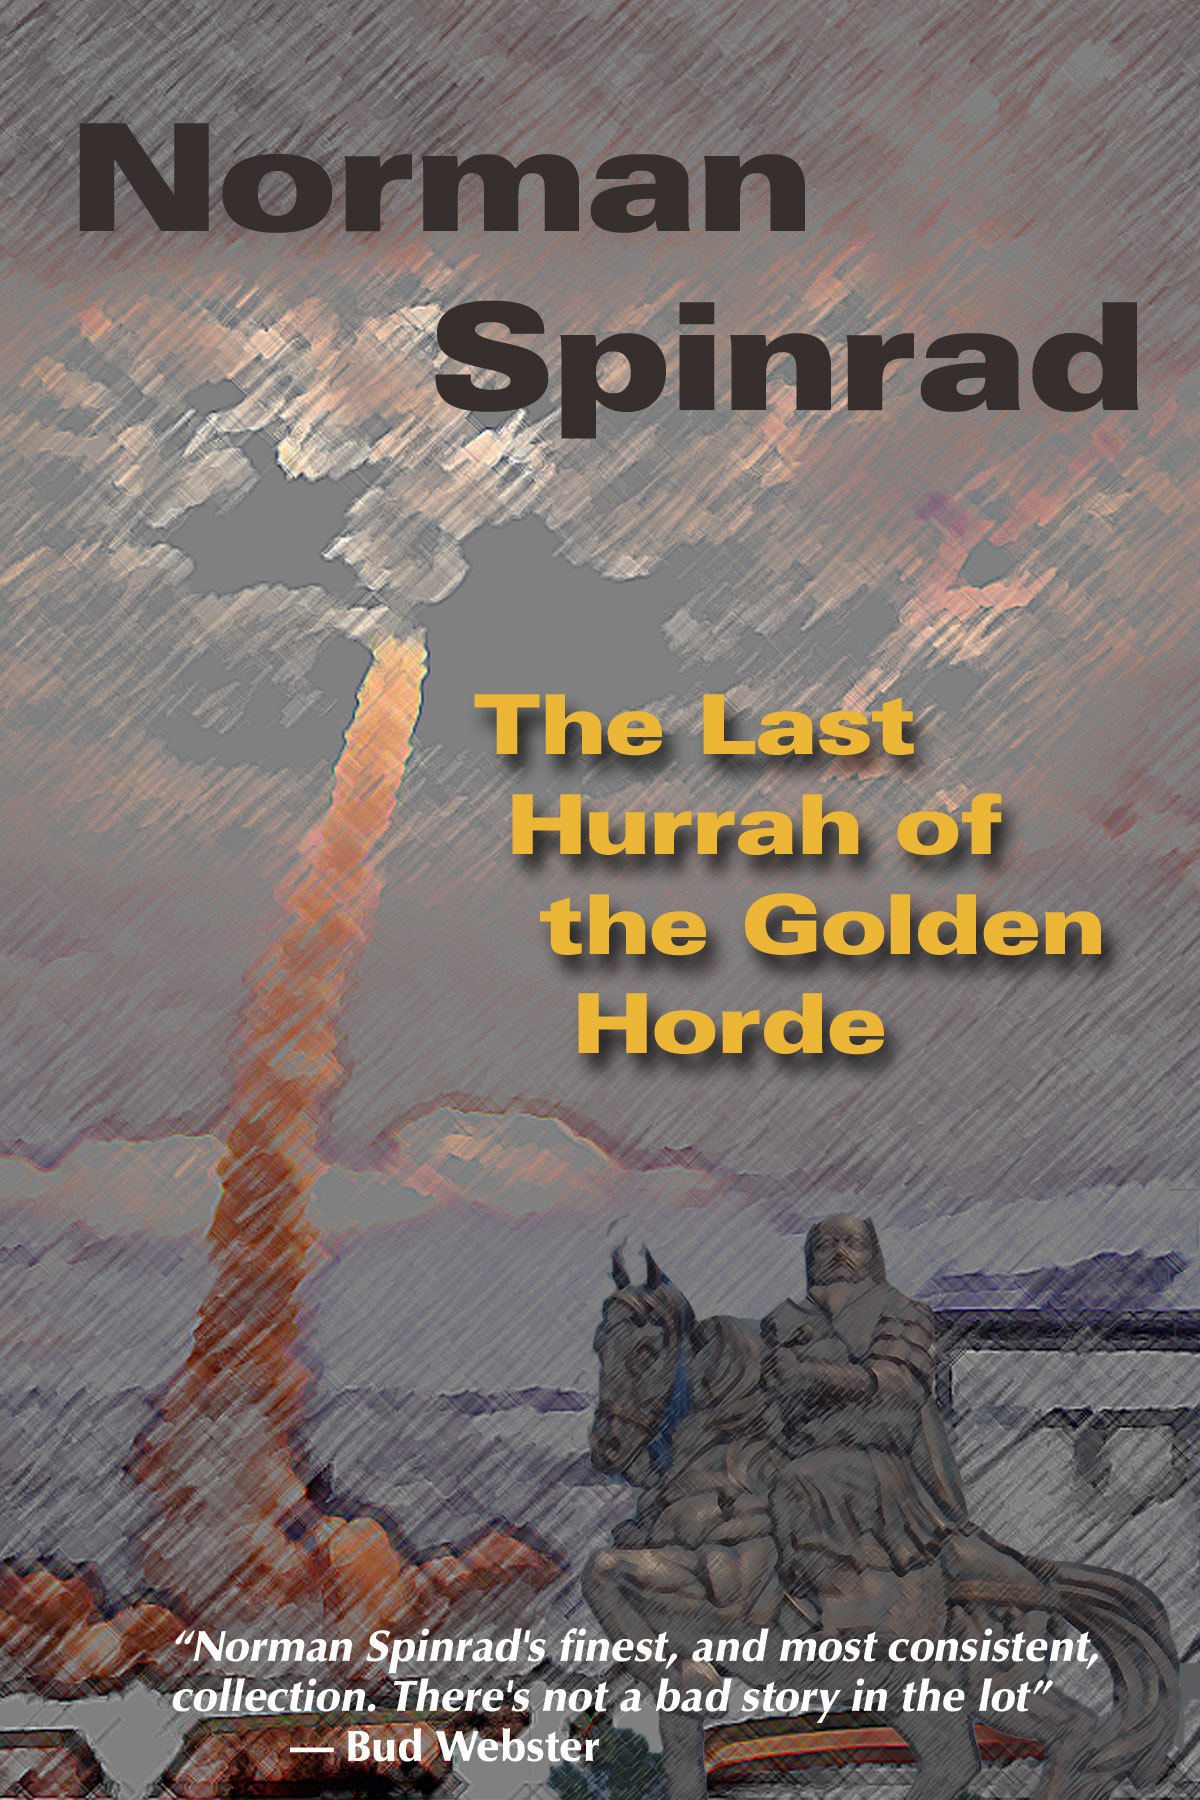 The Last Hurrah of the Golden Horde, by Norman Spinrad